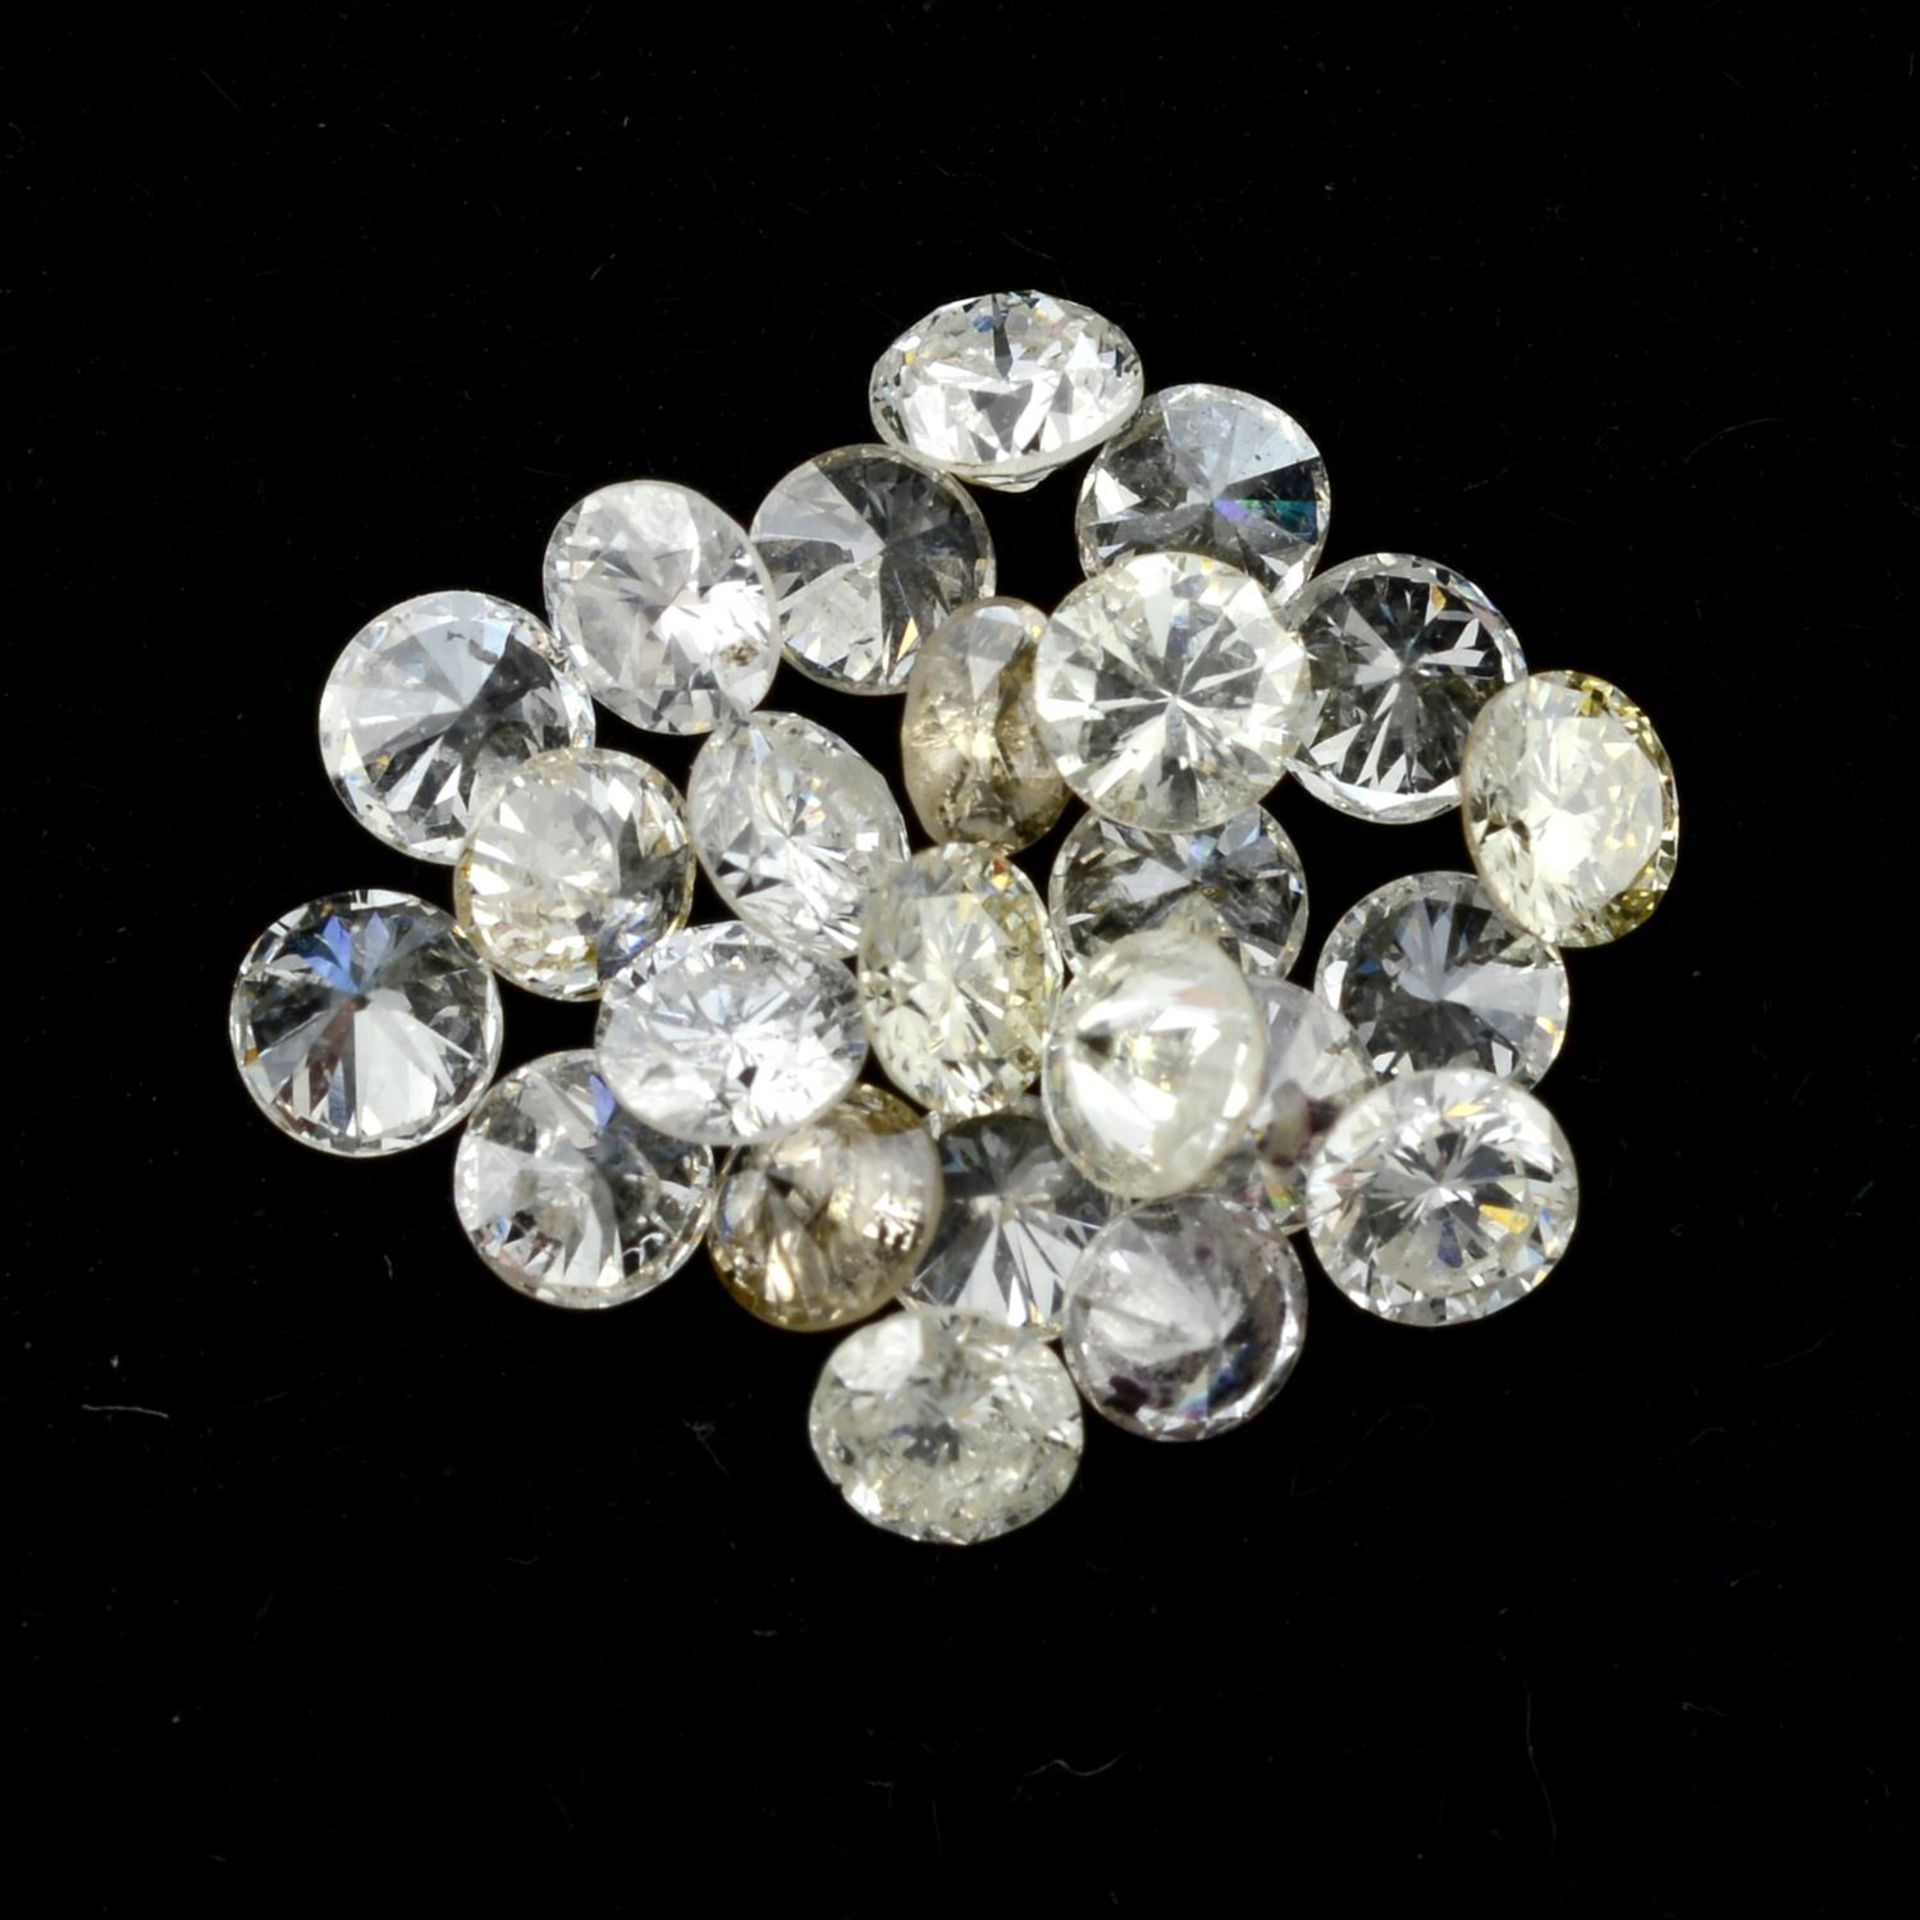 A selection of round brilliant-cut diamonds, total weight 1.75cts.